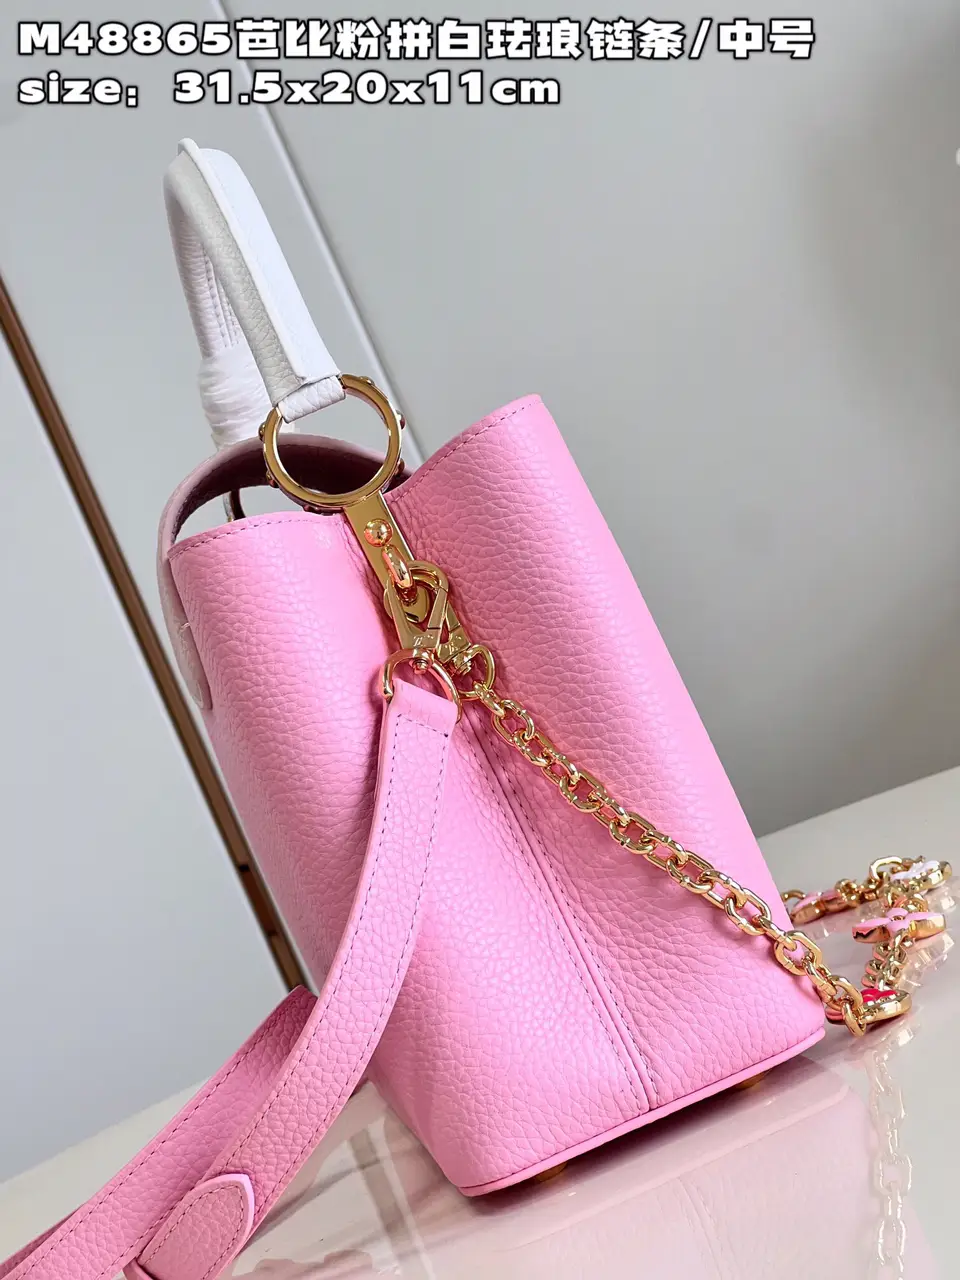 Barbie powder accessories lv underarm bag💋💋💋, Gallery posted by  Vivian💗💗💗